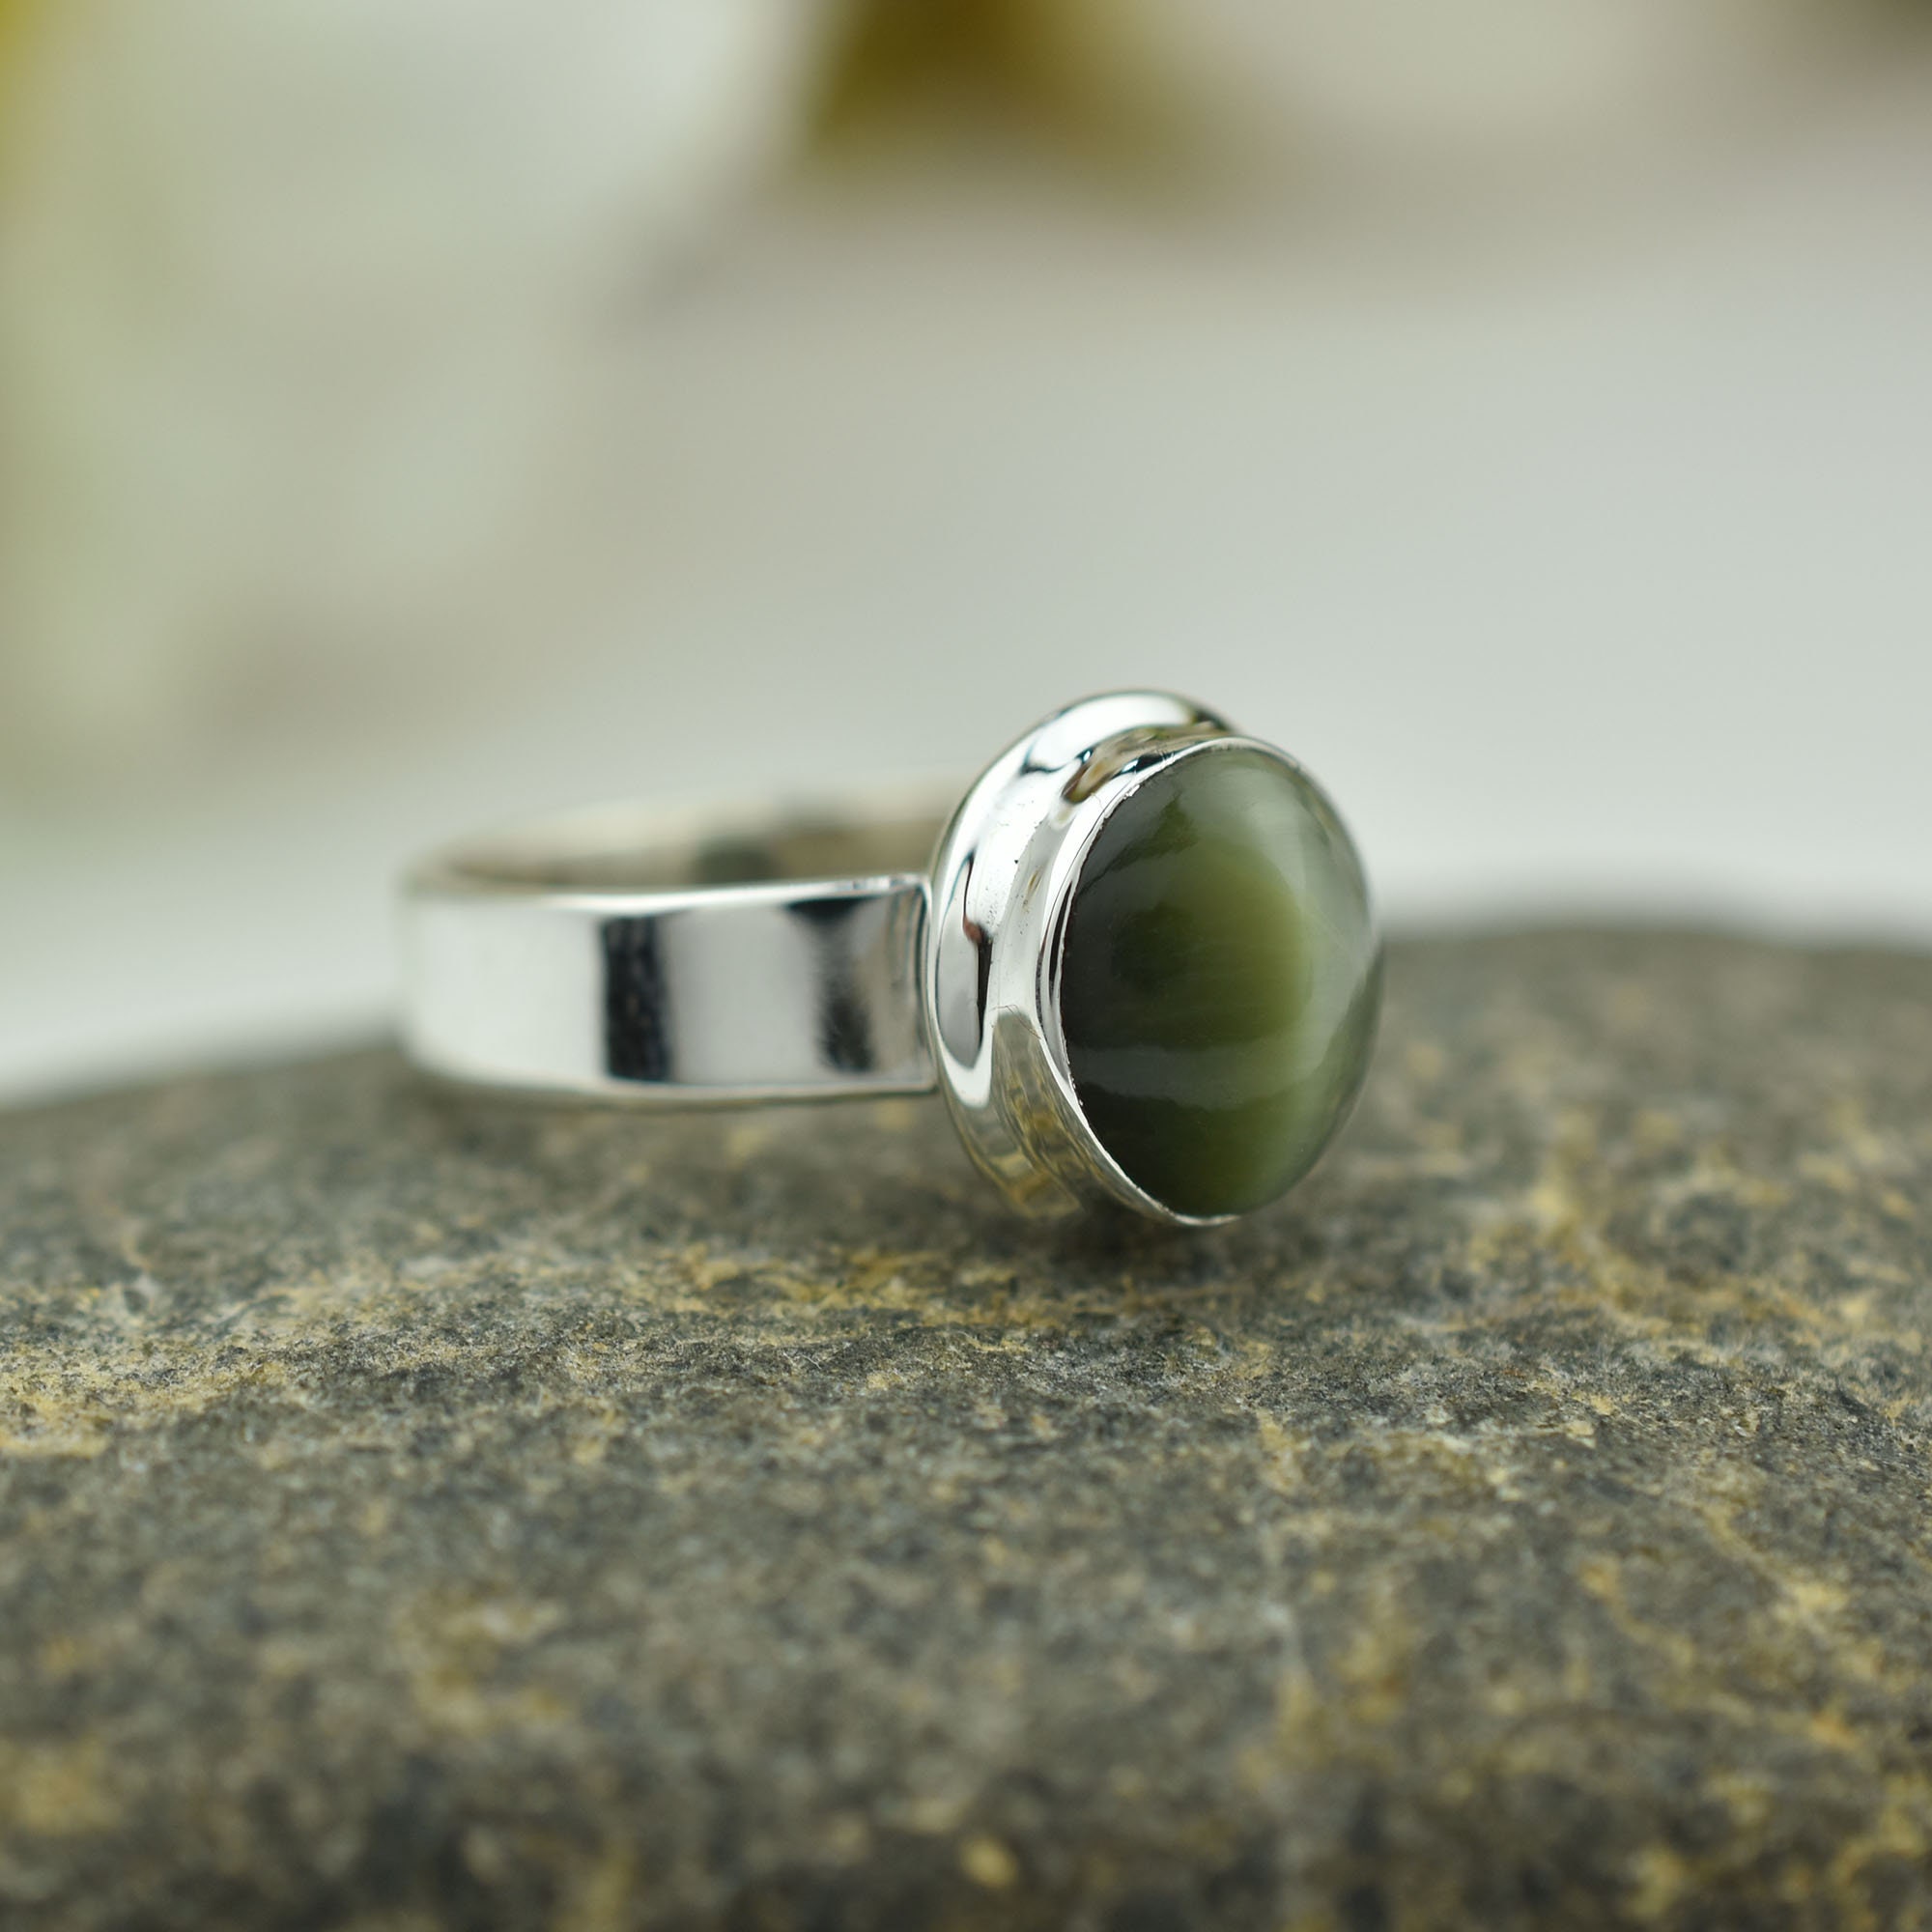 Make your look stylish by wearing this cats eye stone ring @ http://shop. catseye.org.in/ | Cat eye jewelry, Cats eye ring, Everyday rings